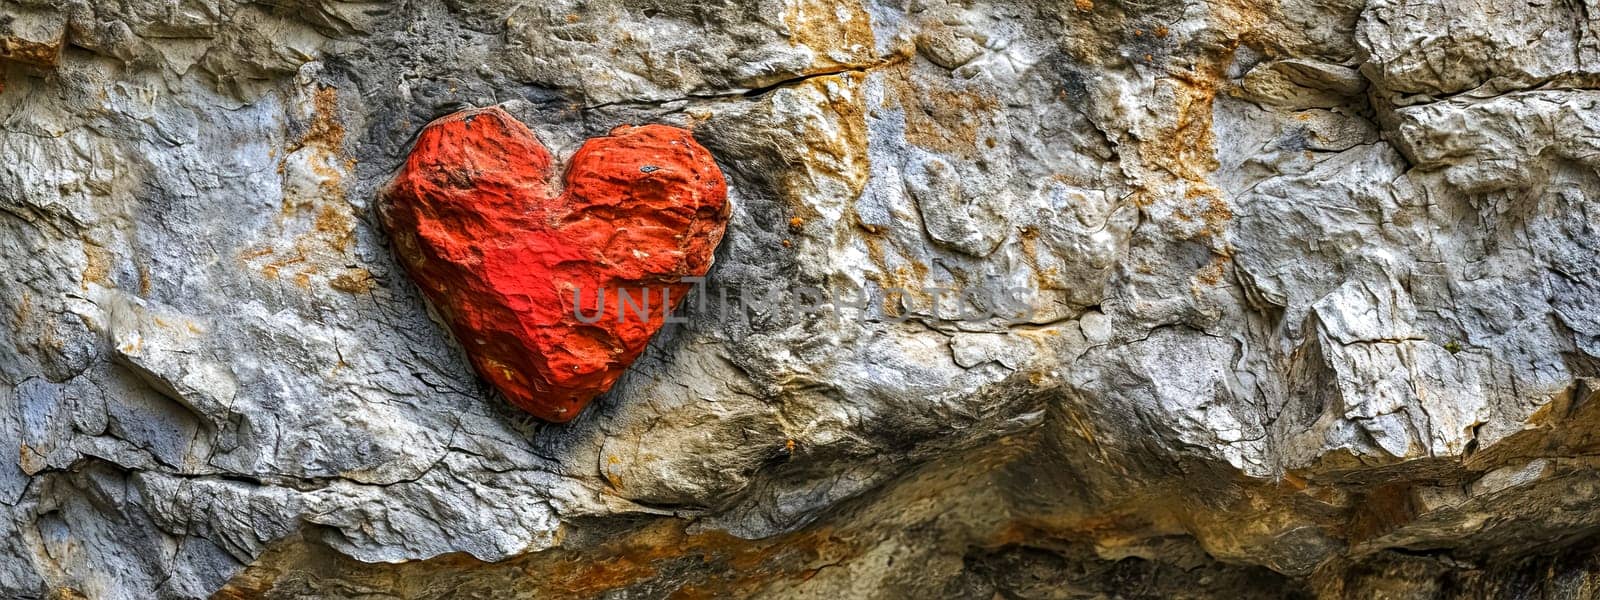 Valentine's Day, bright red heart painted on a rugged stone surface, contrasting sharply with the natural grey tones of the rock, symbolizing love or passion in a raw, natural setting by Edophoto